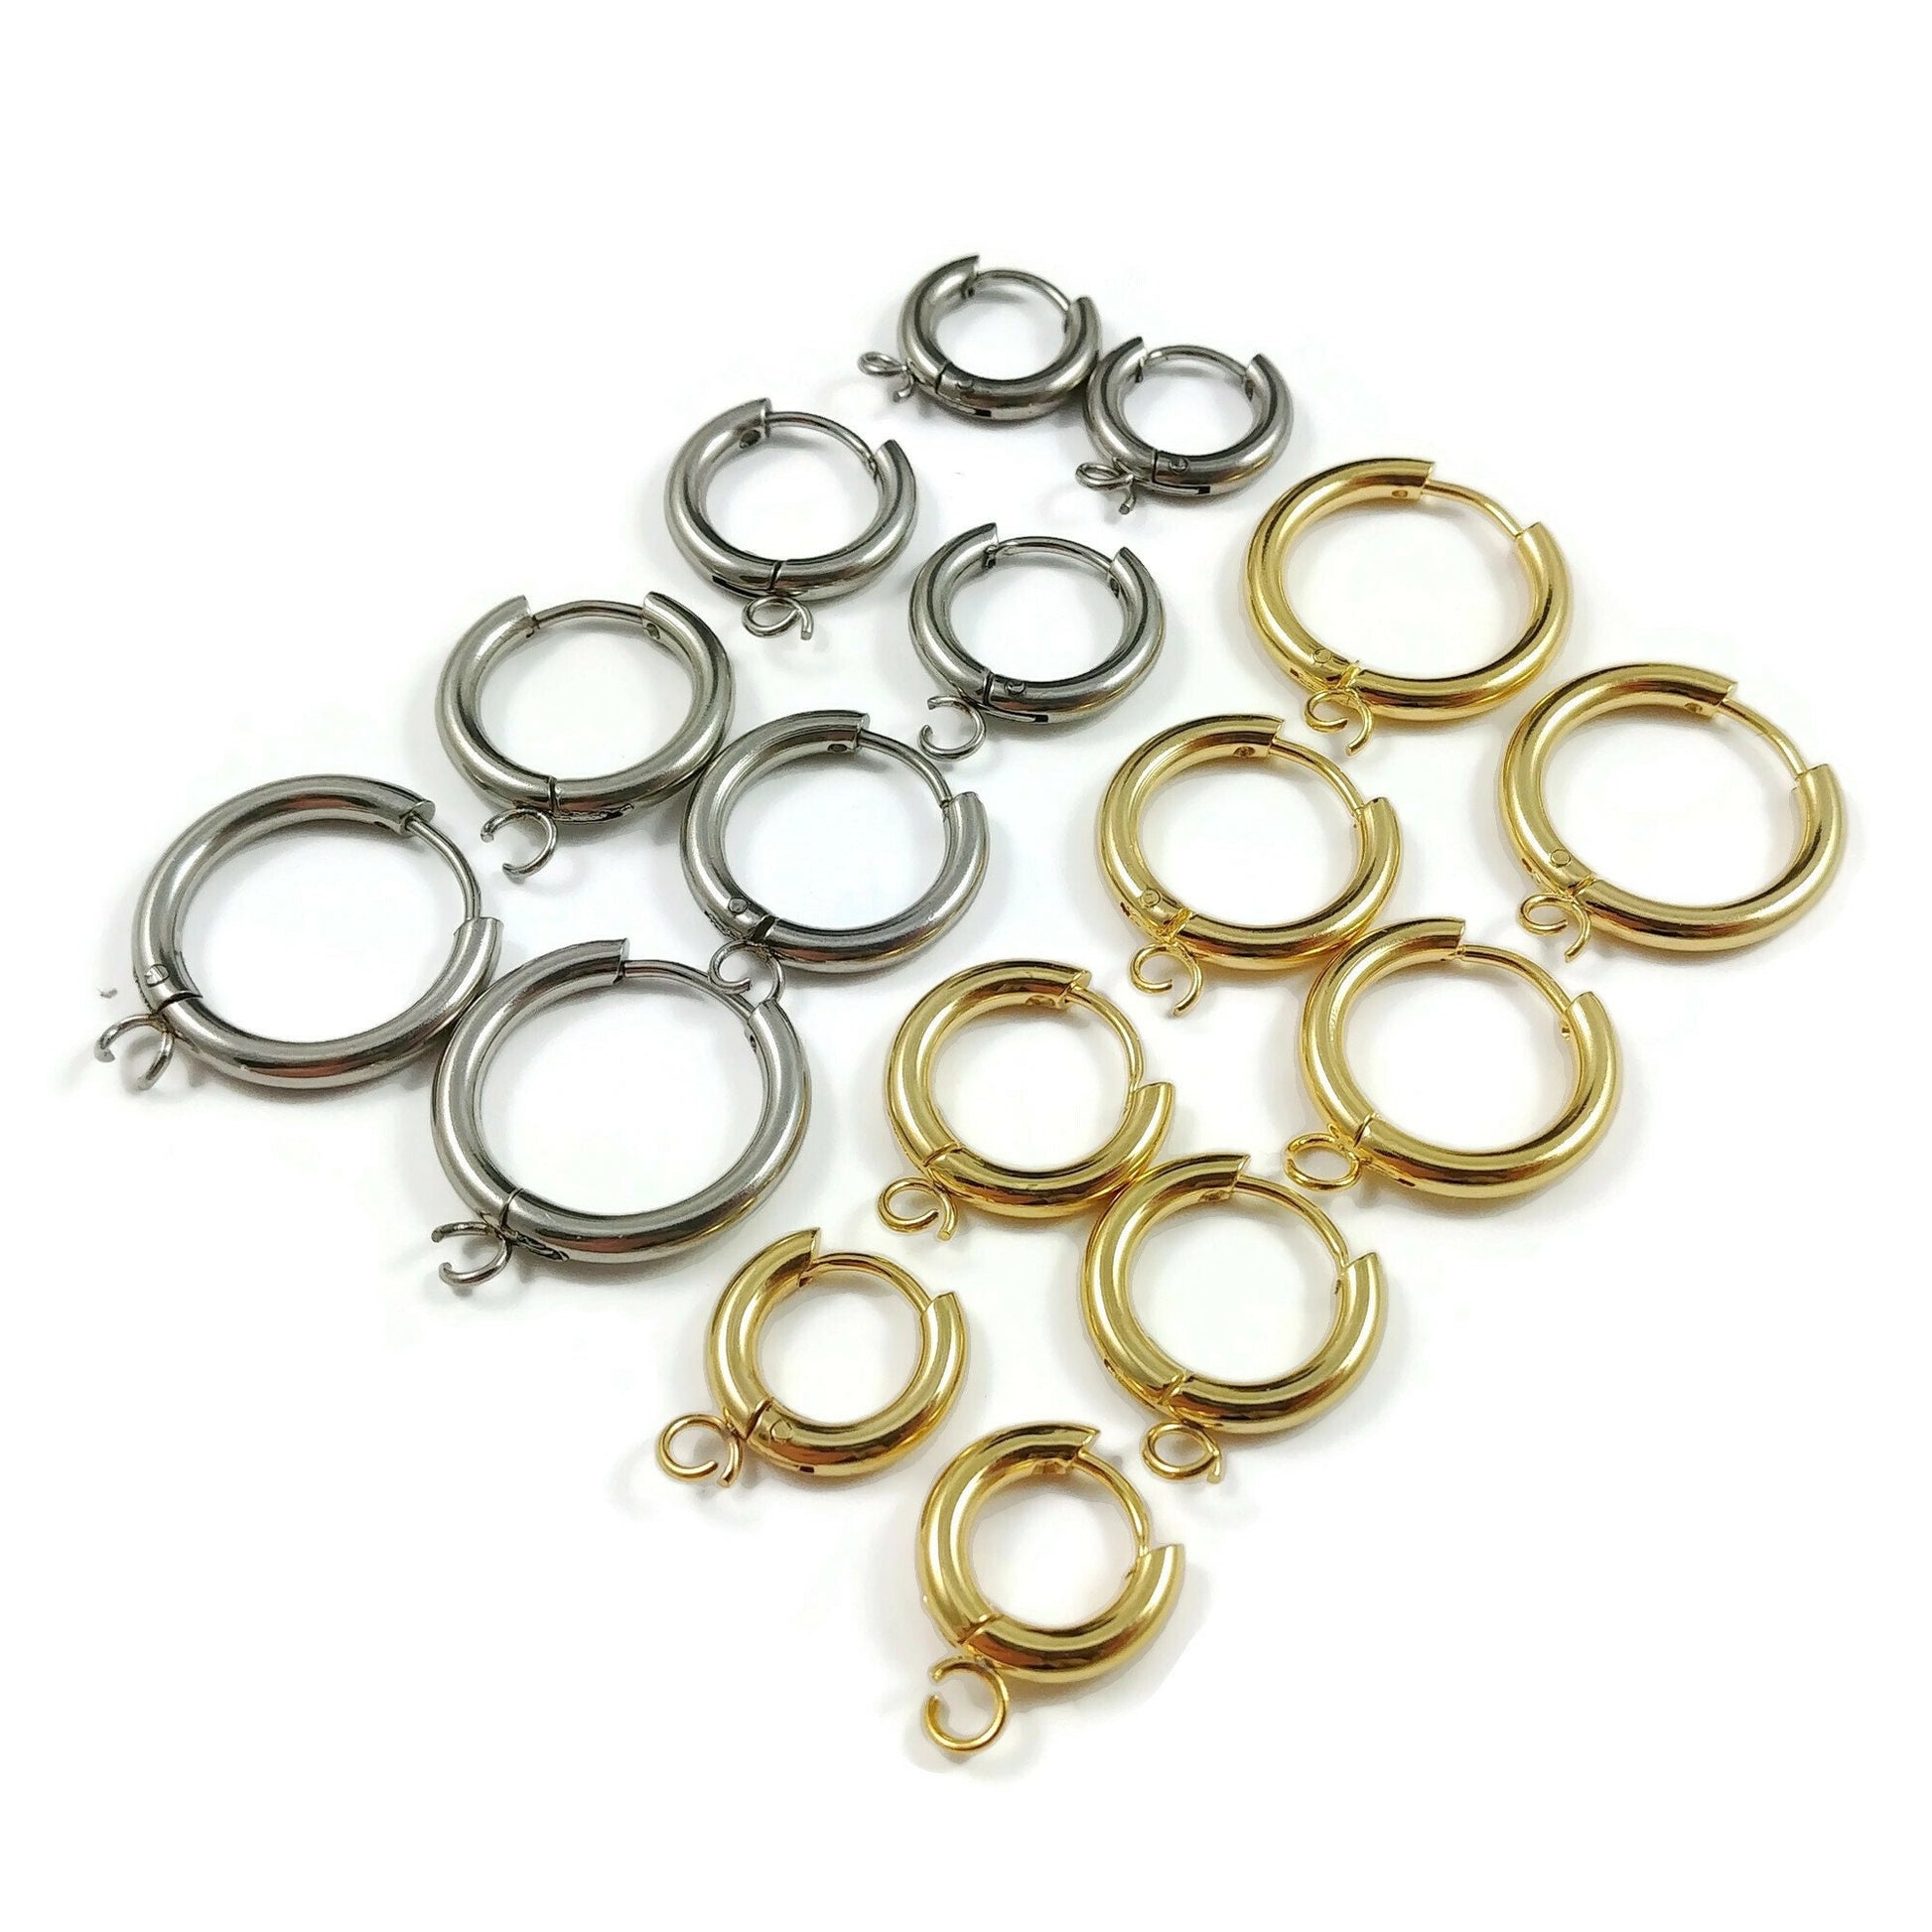 Stainless steel huggie hoops with loop, Gold, Silver, Earring findings, Small round hoops for jewelry making